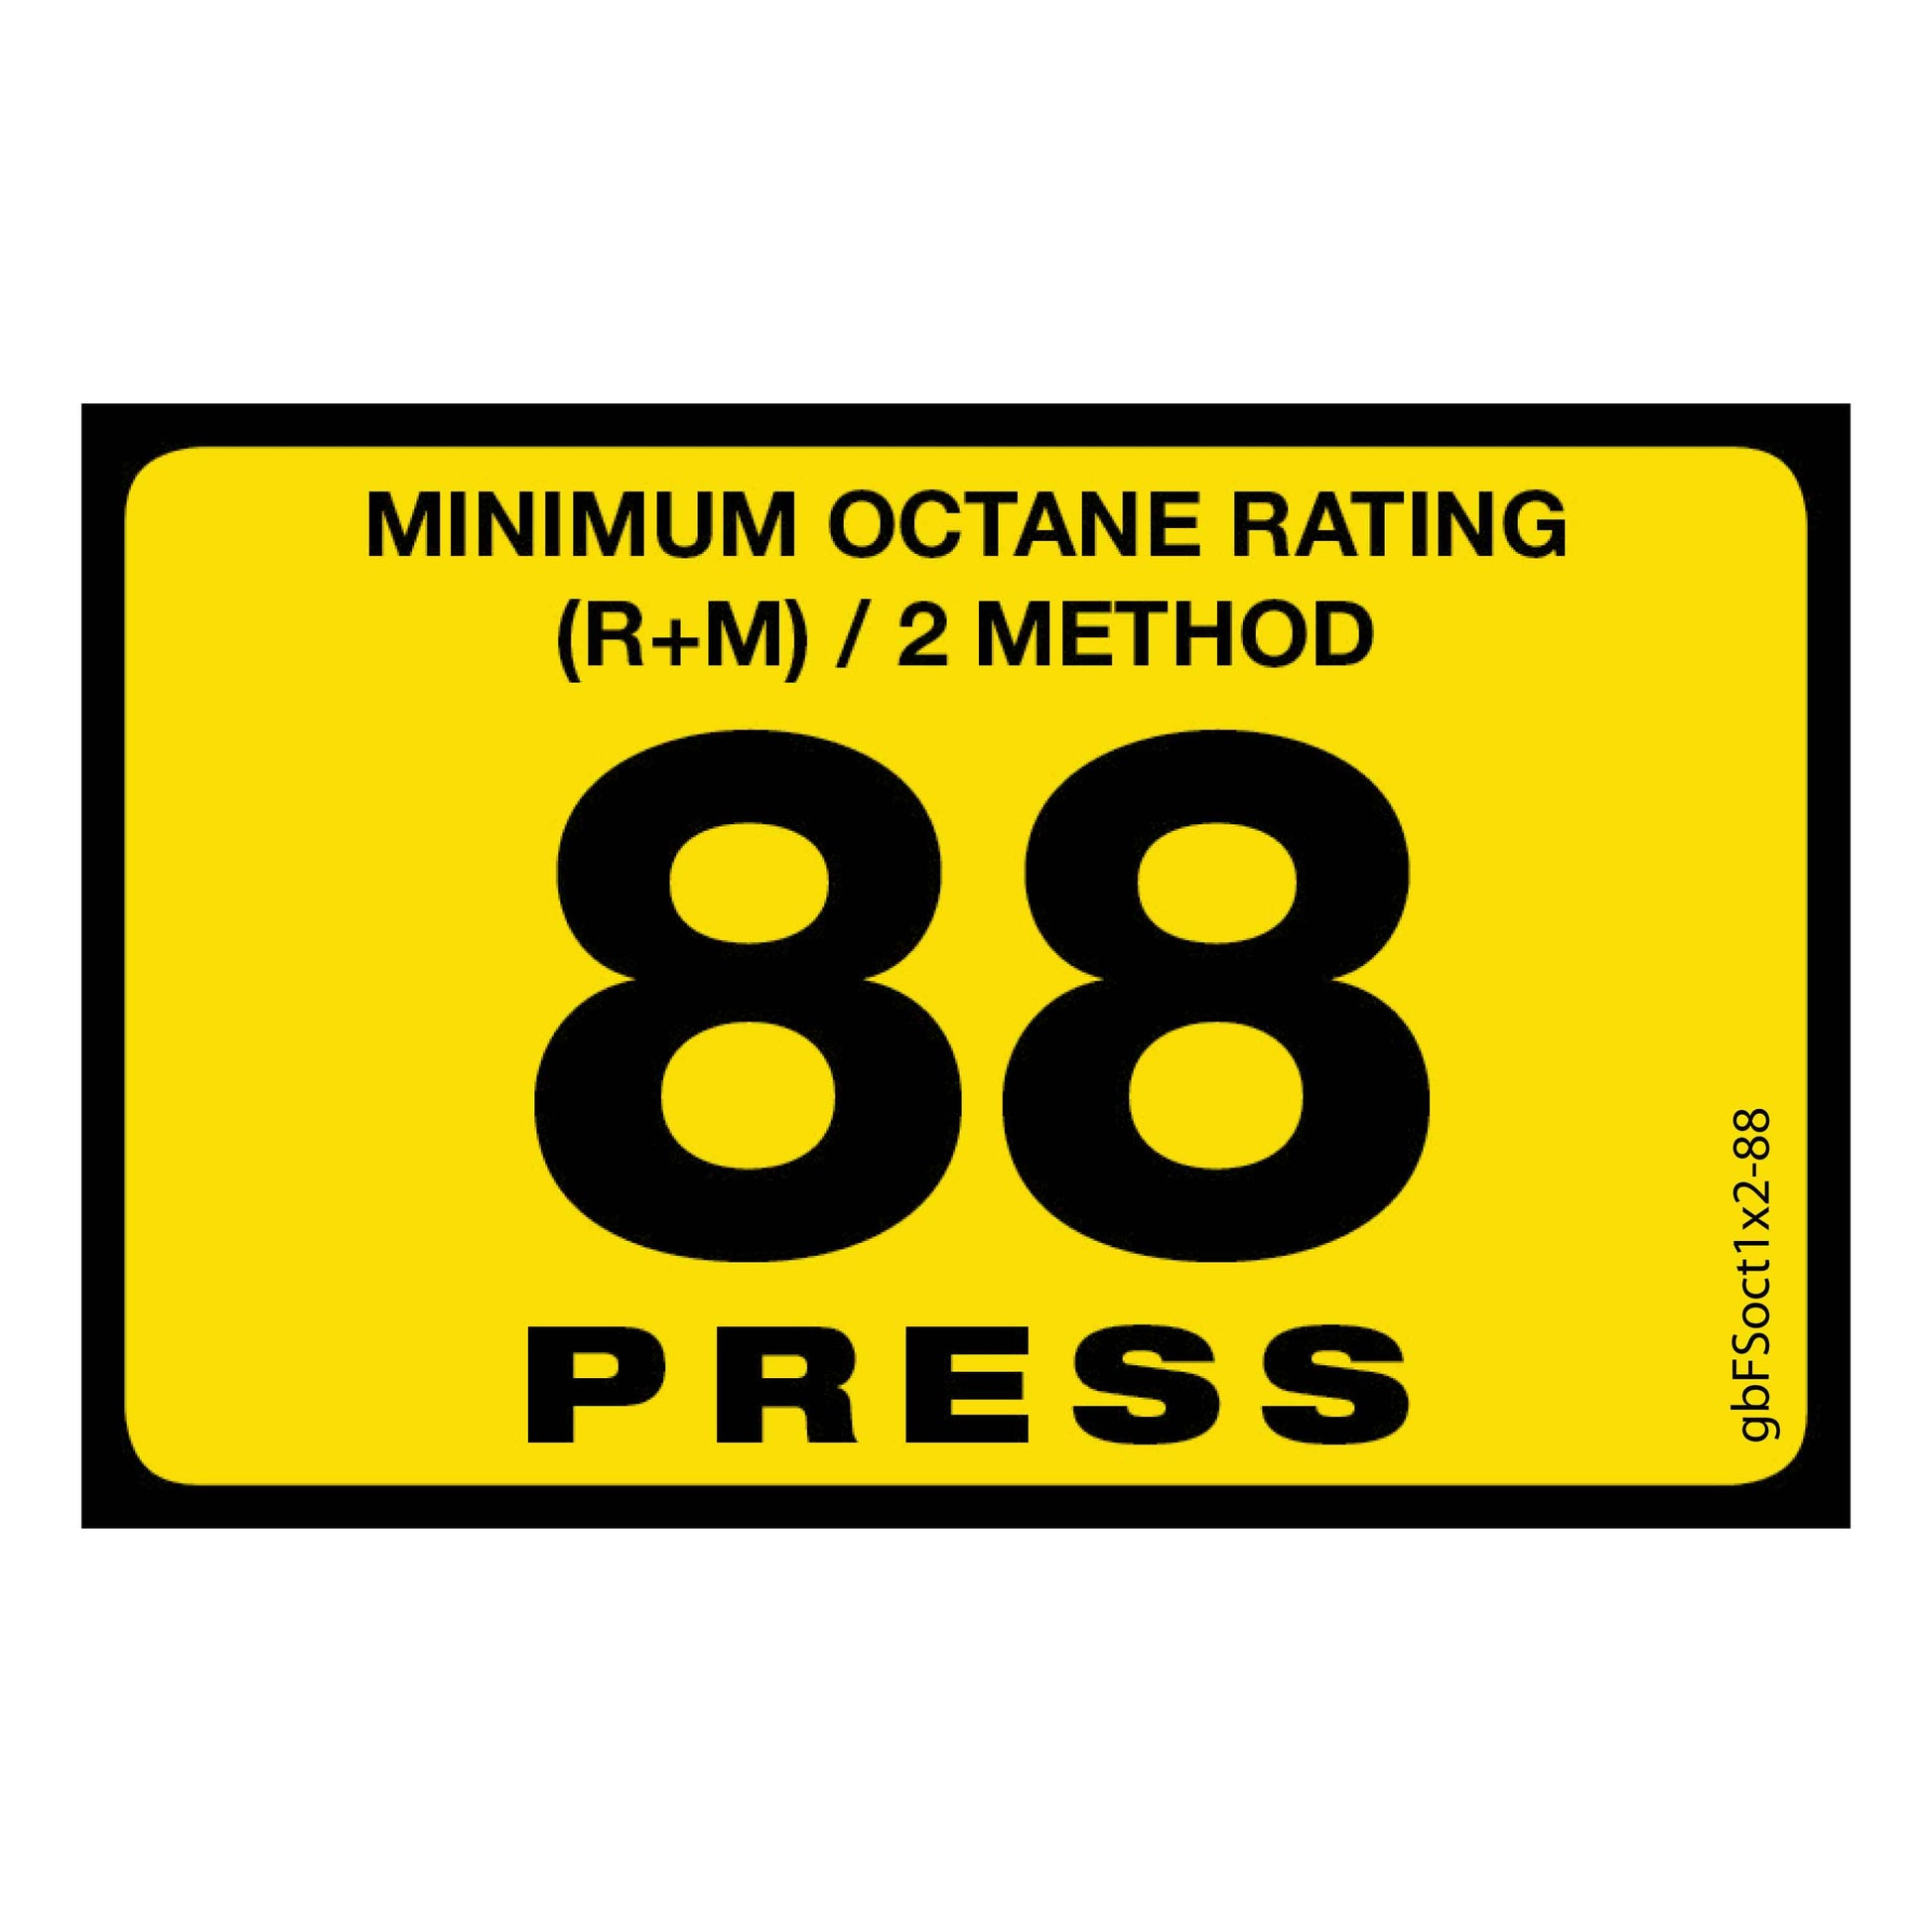 88 Press Octane Rating Decal. 1 inch by 2 inches in size. 